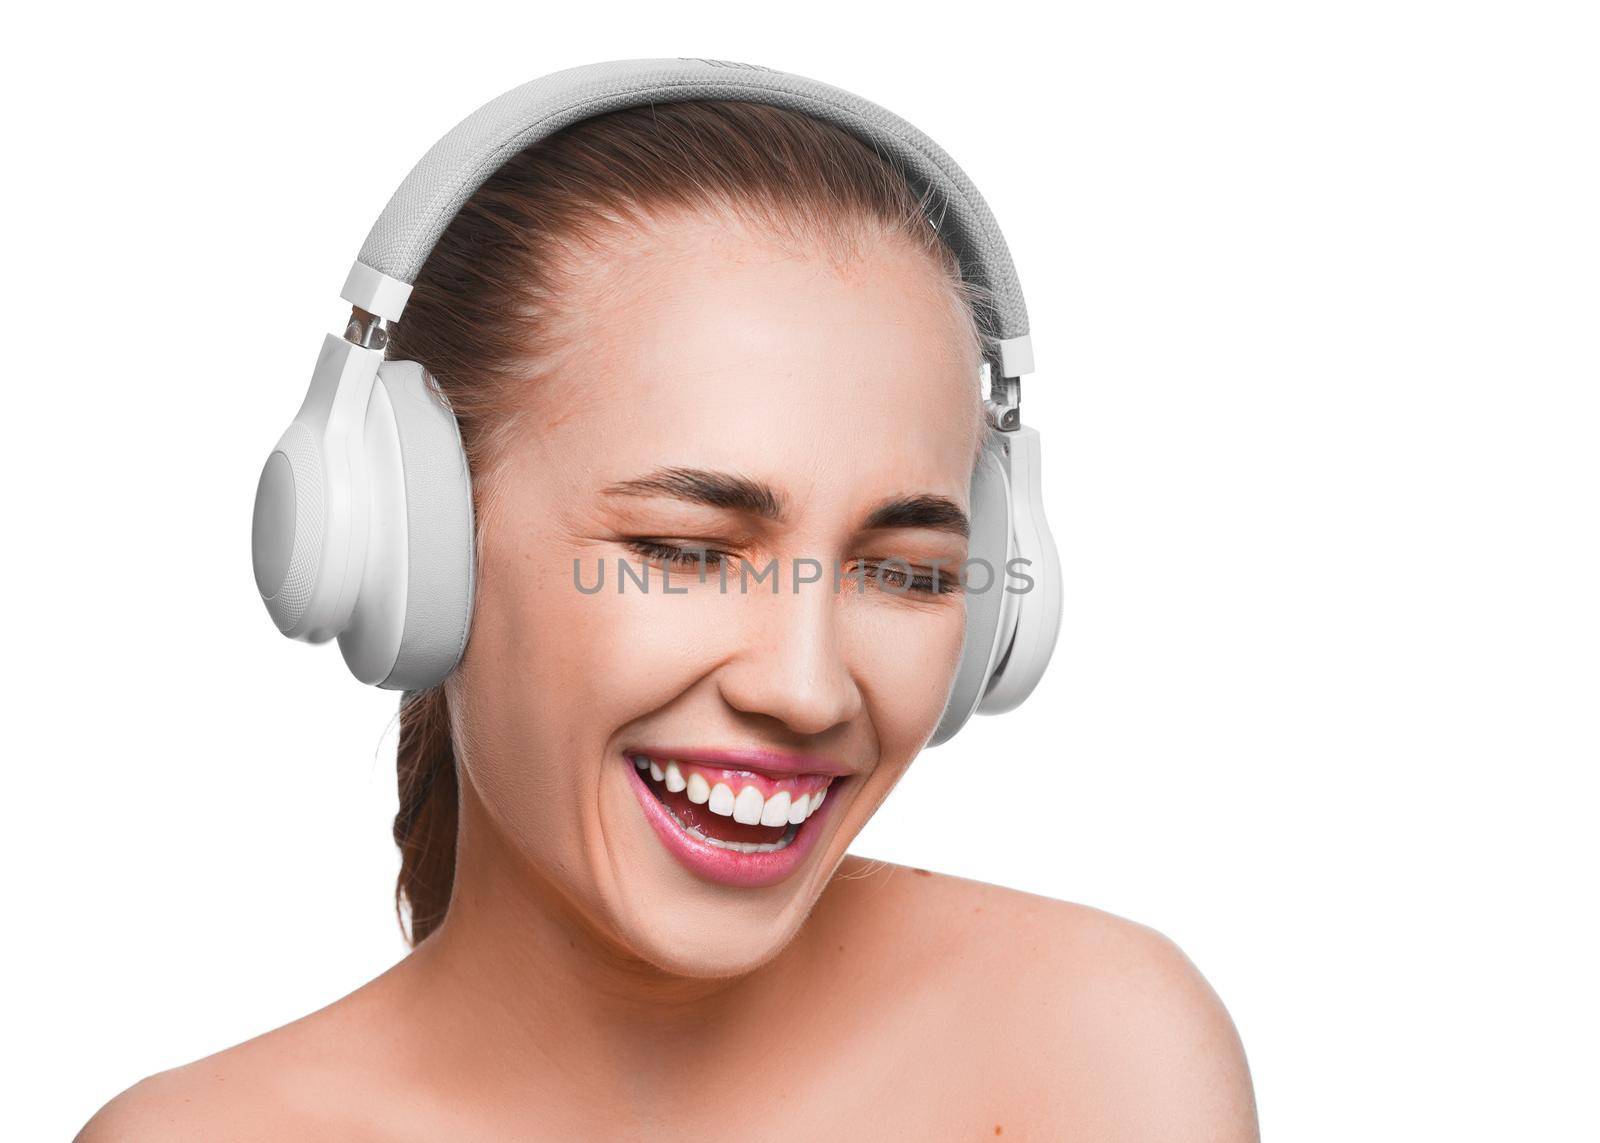 Happy smiling woman with closed eyes in headphones over white background.